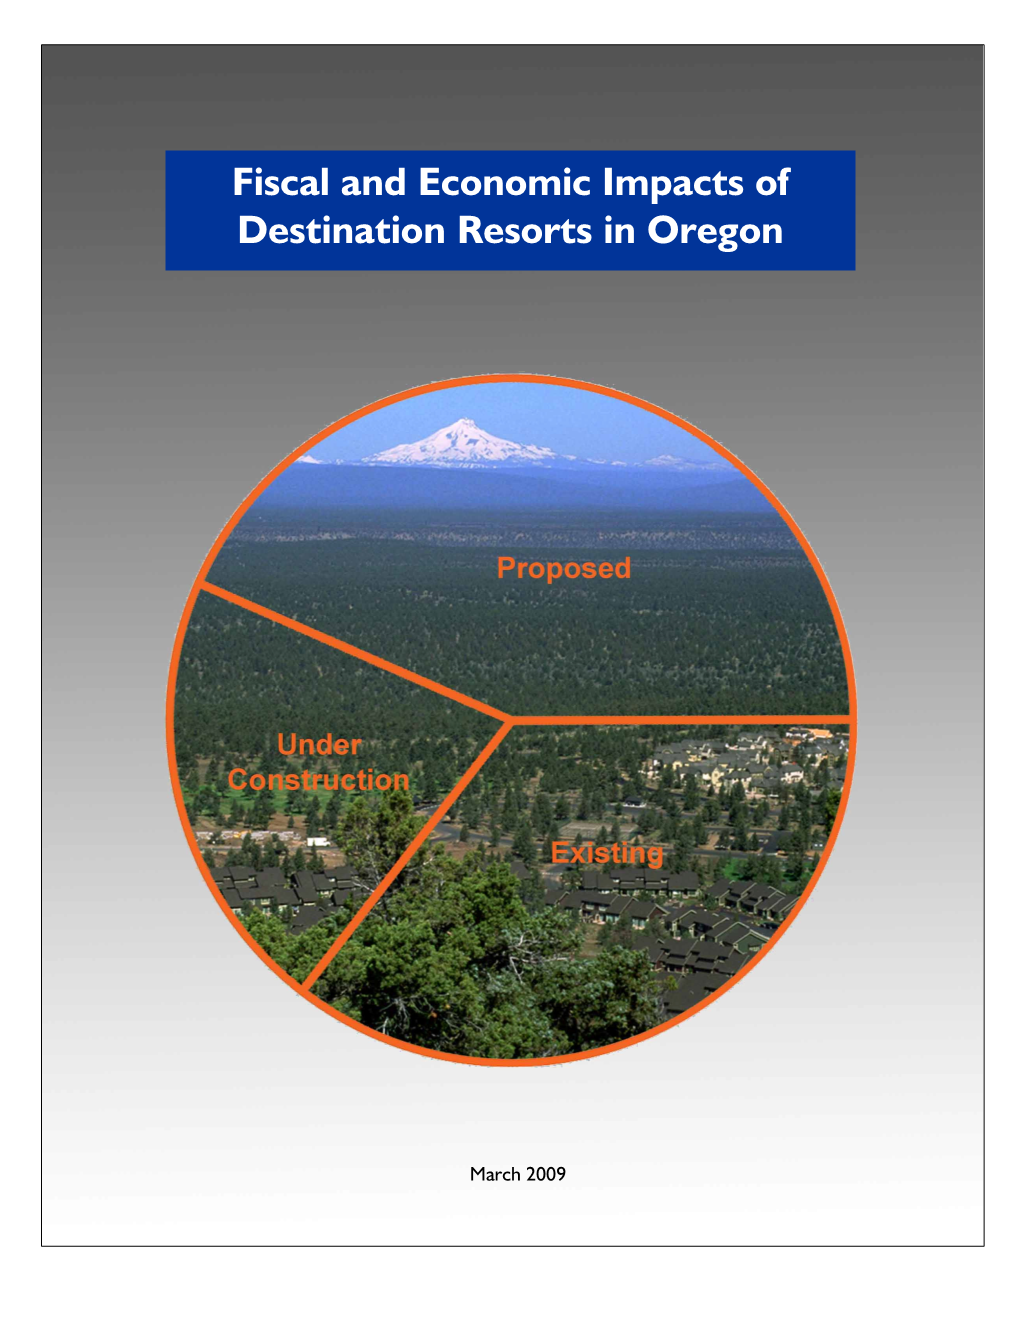 Fiscal and Economic Impacts of Destination Resorts in Oregon